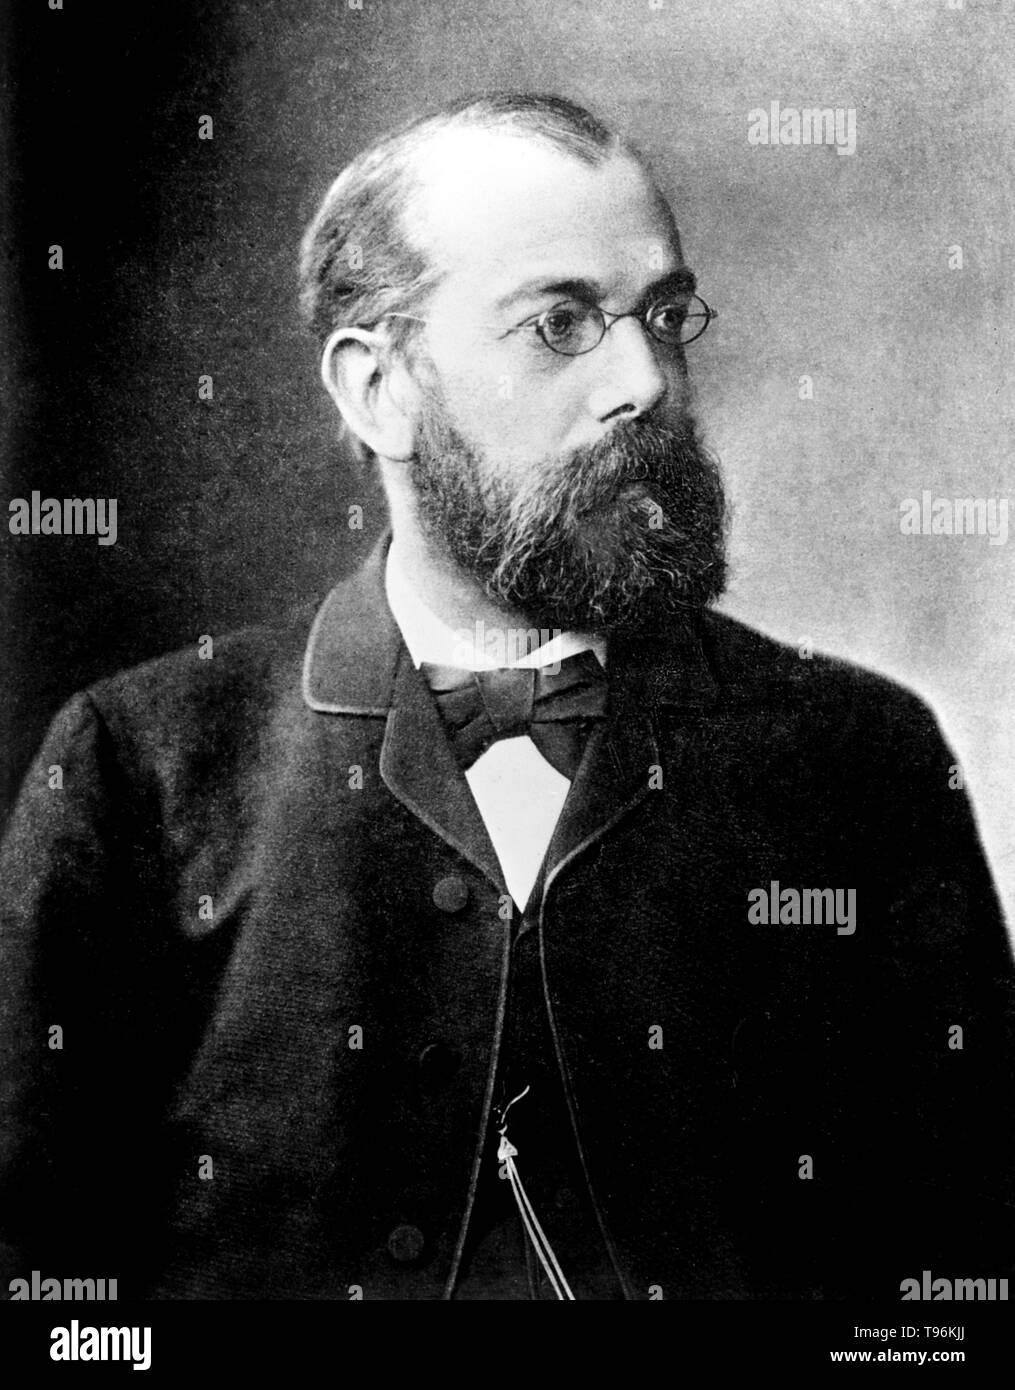 Heinrich Hermann Robert Koch (December 11, 1843 - May 27 1910) was a German physician and microbiologist. As the founder of modern bacteriology, he identified the specific causative agents of tuberculosis, cholera, and anthrax and gave experimental support for the concept of infectious disease, which included experiments on humans and animals. Koch created and improved laboratory technologies and techniques in the field of microbiology, and made key discoveries in public health. Stock Photo